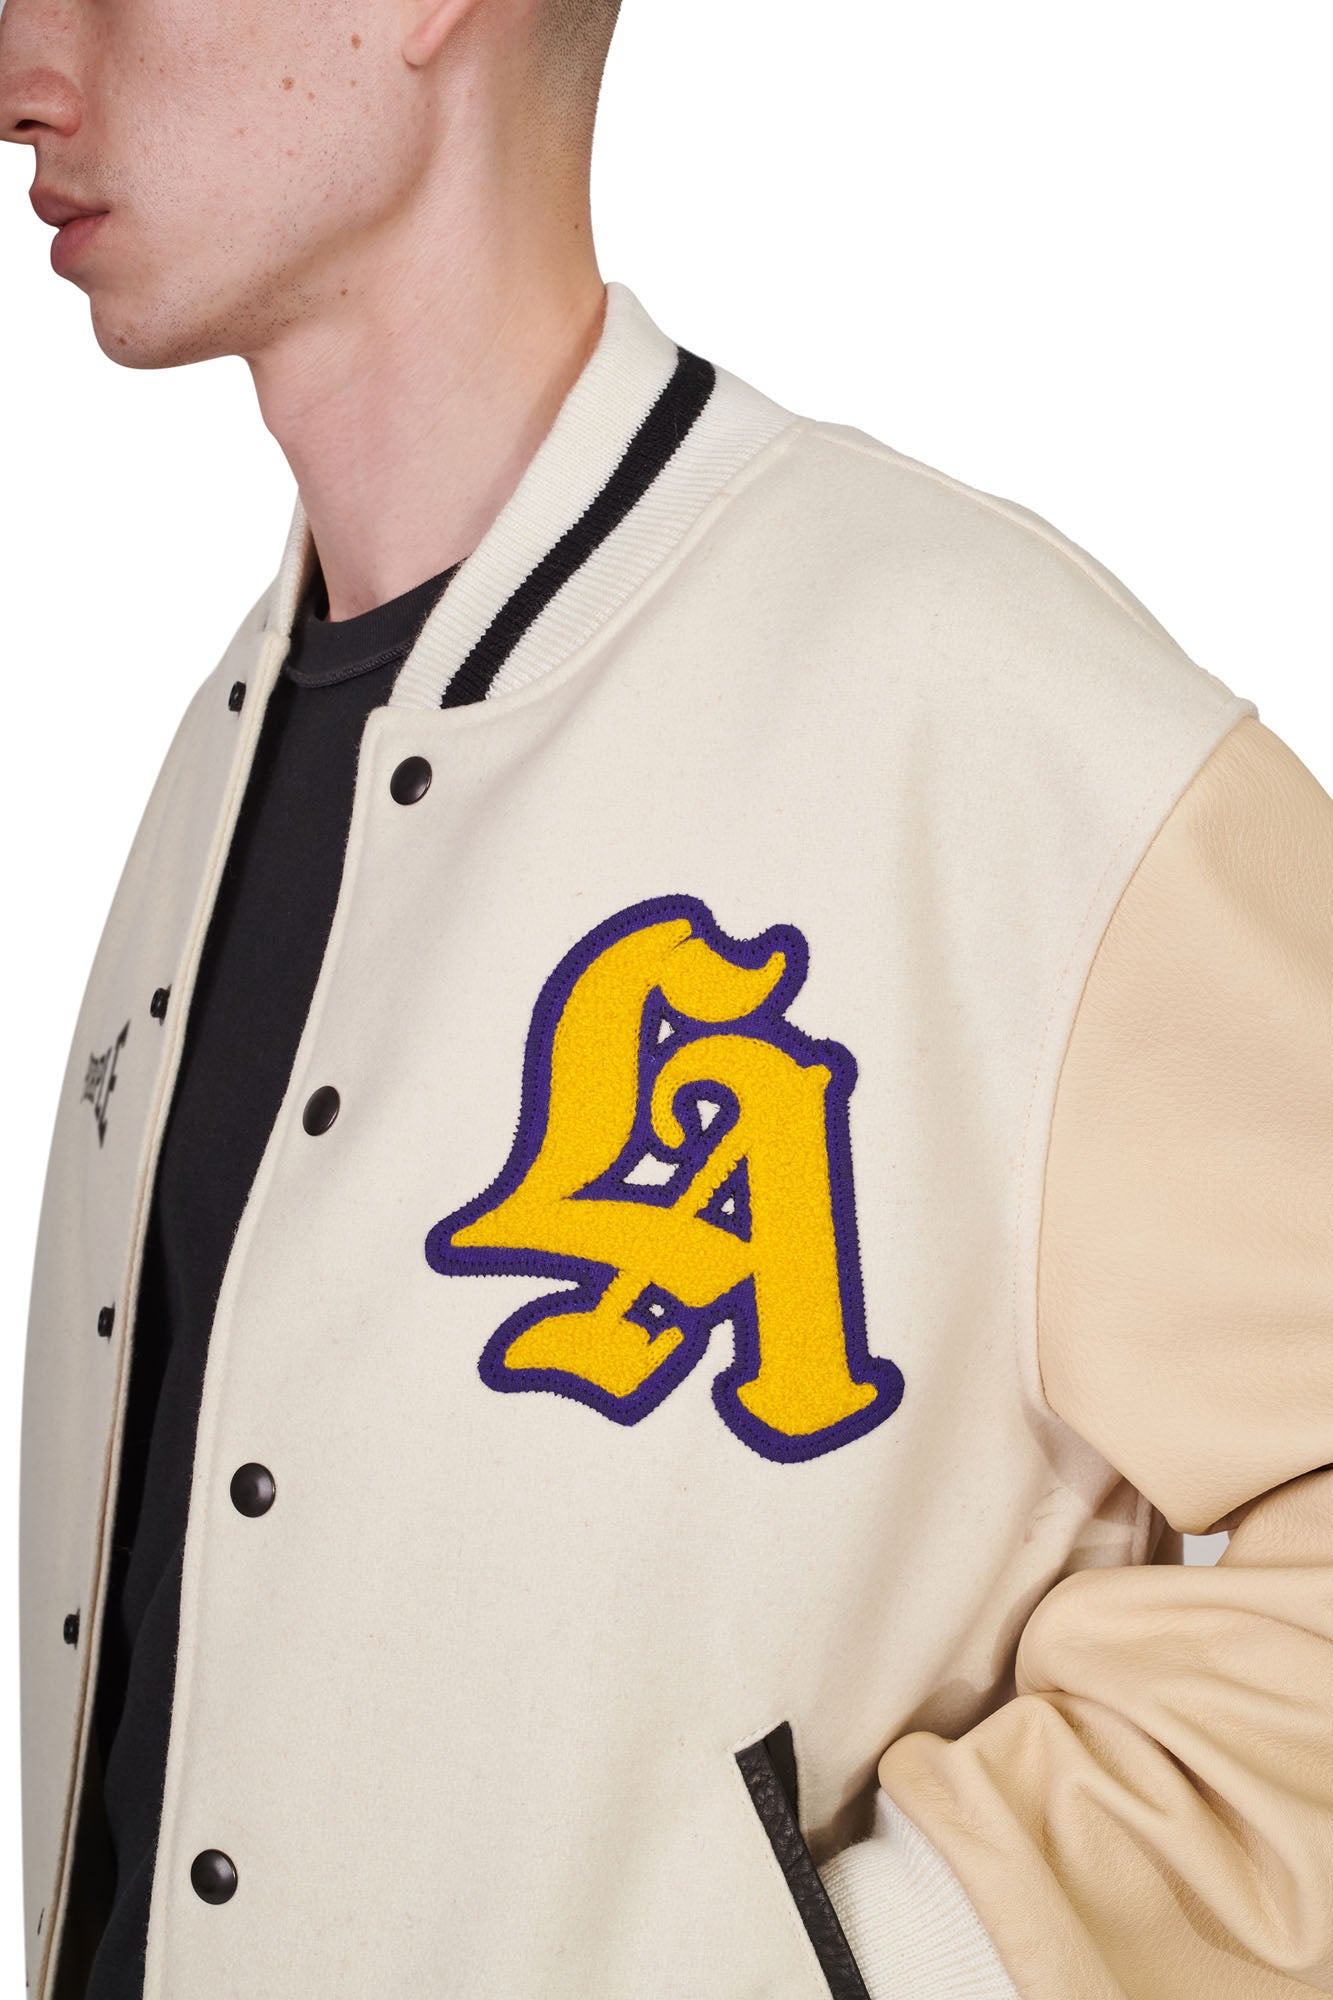 PURPLE BRAND - Men's Letterman Jacket - Style No. P320 - Golden Bear White and Gold - Front Detail Patch